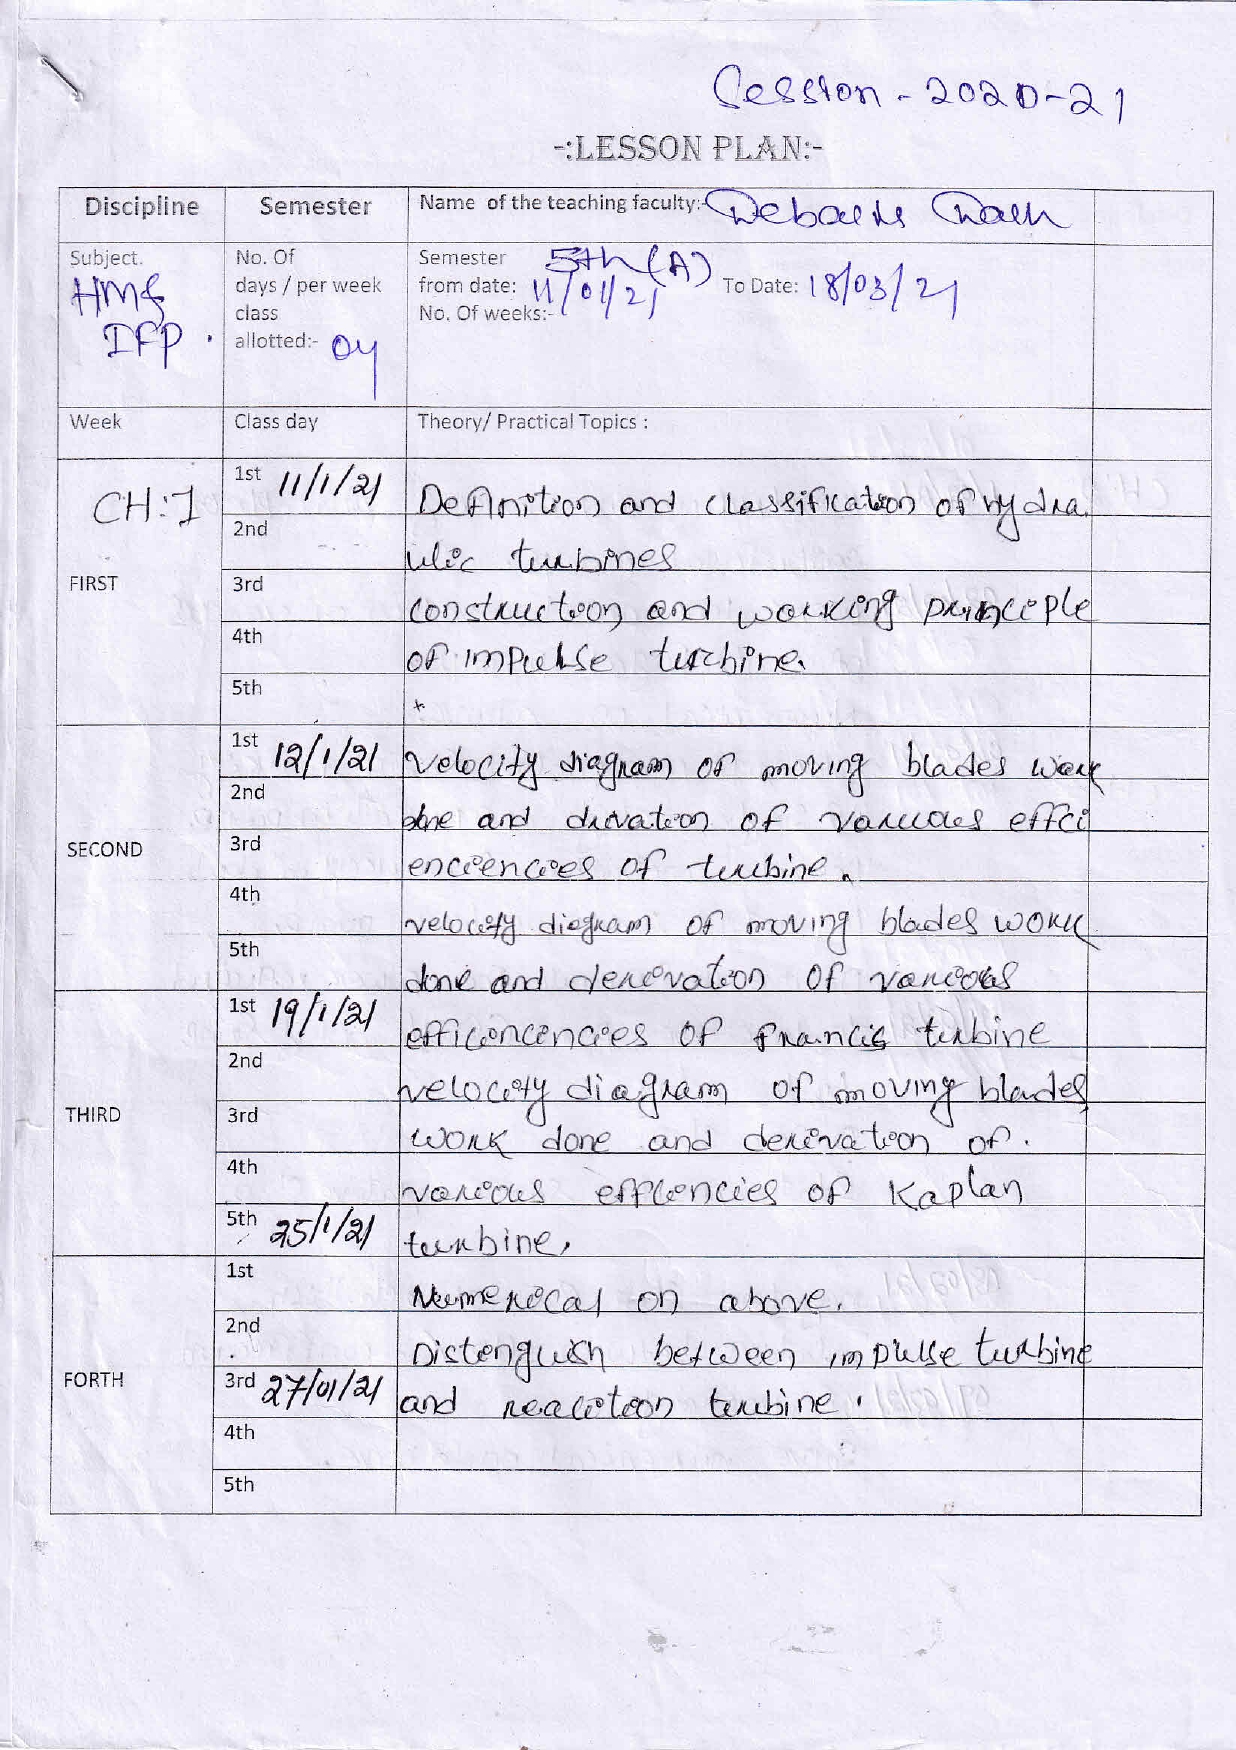 lession plan of mechanical dept_page-0001